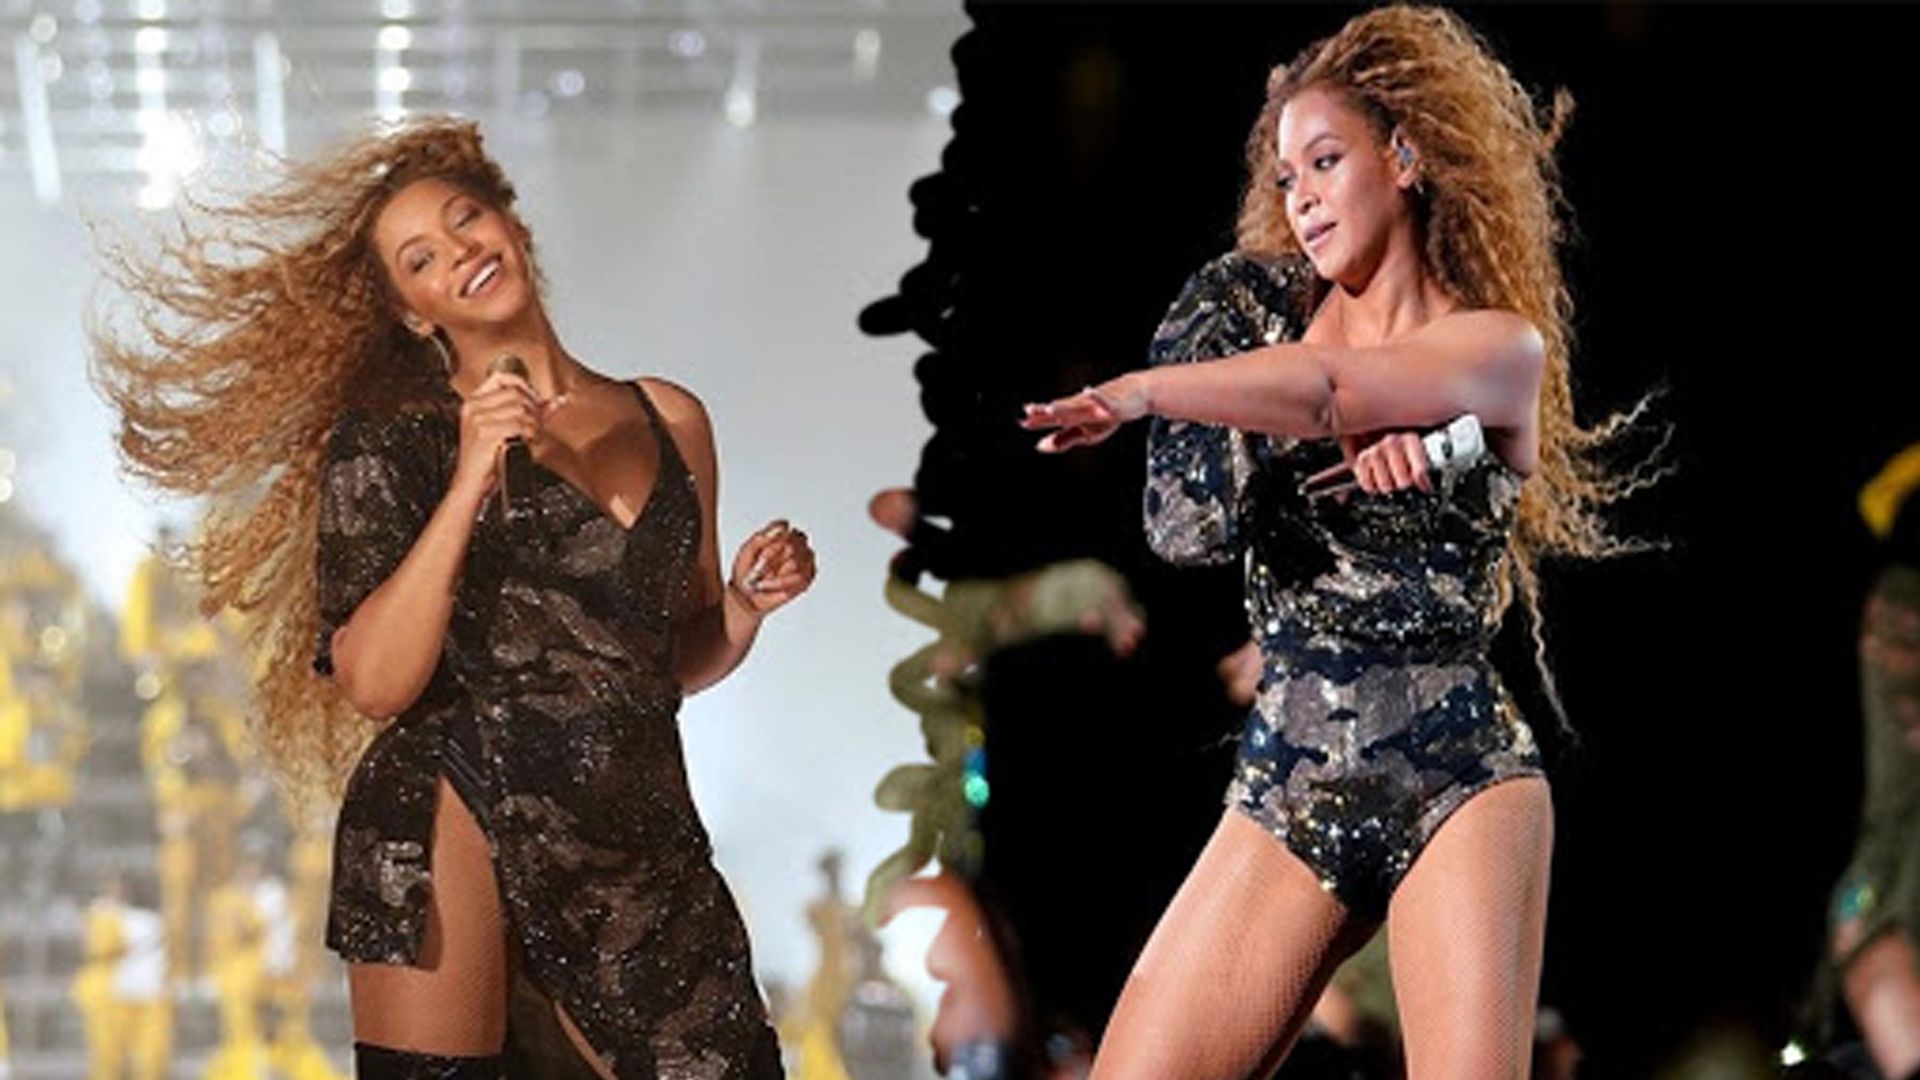 Beyonce's wardrobe malfunction didn't stop her from performing at Coachella1920 x 1080